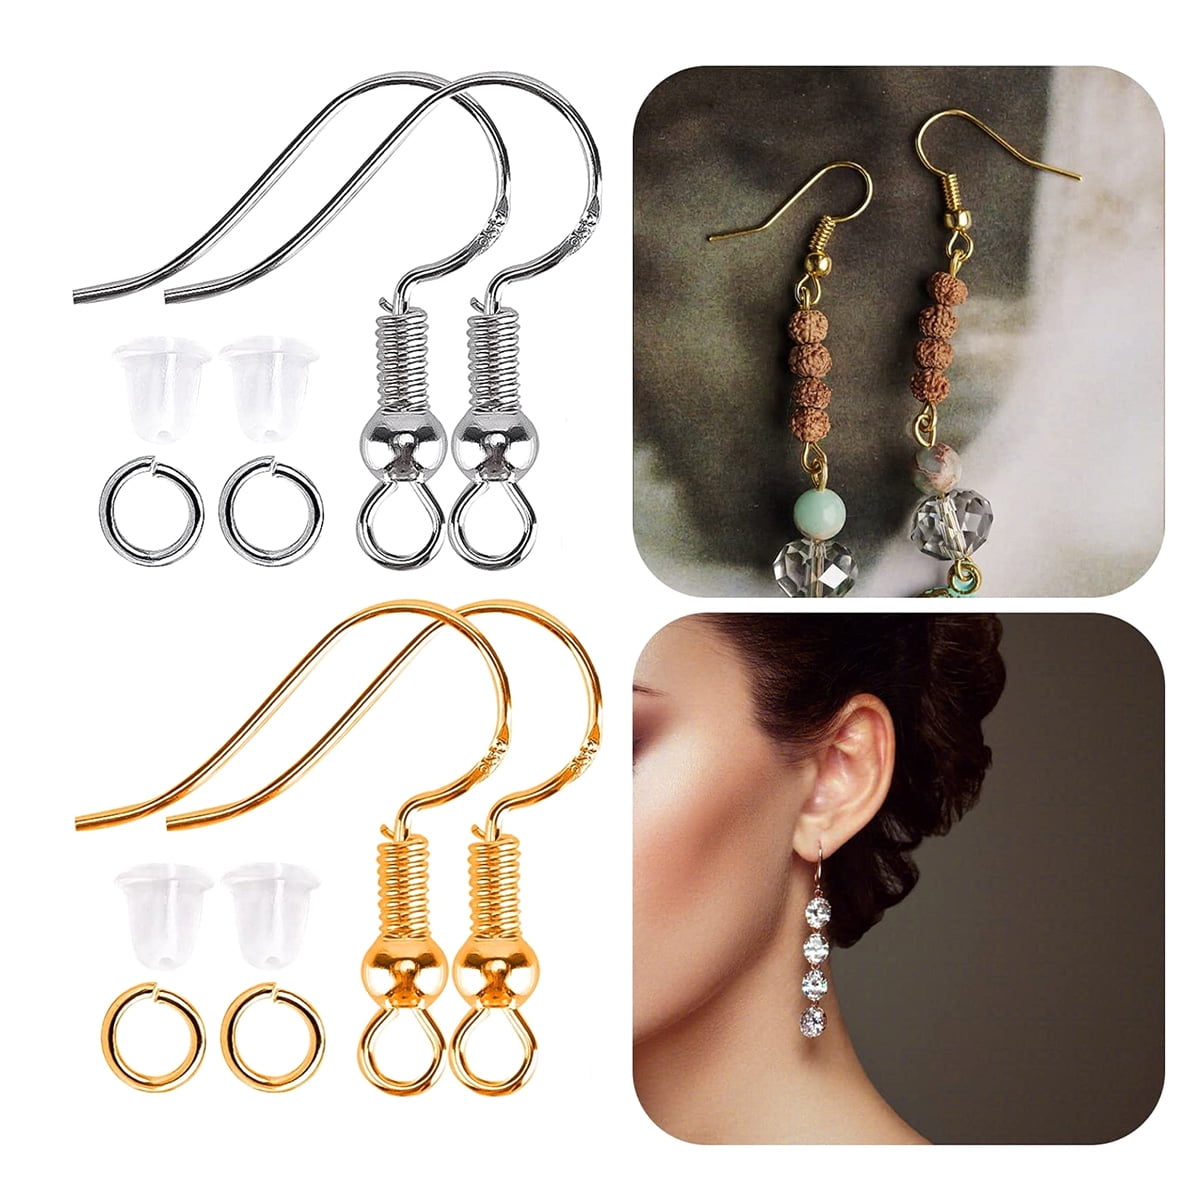 Amazon.com: MOLIK Earring Lifters Backs 6 Pairs Adjustable Hypoallergenic  Earring Secure Backs Lifter for Droopy Ear Heavy Earring (Silver/Gold/Rose)  : Clothing, Shoes & Jewelry